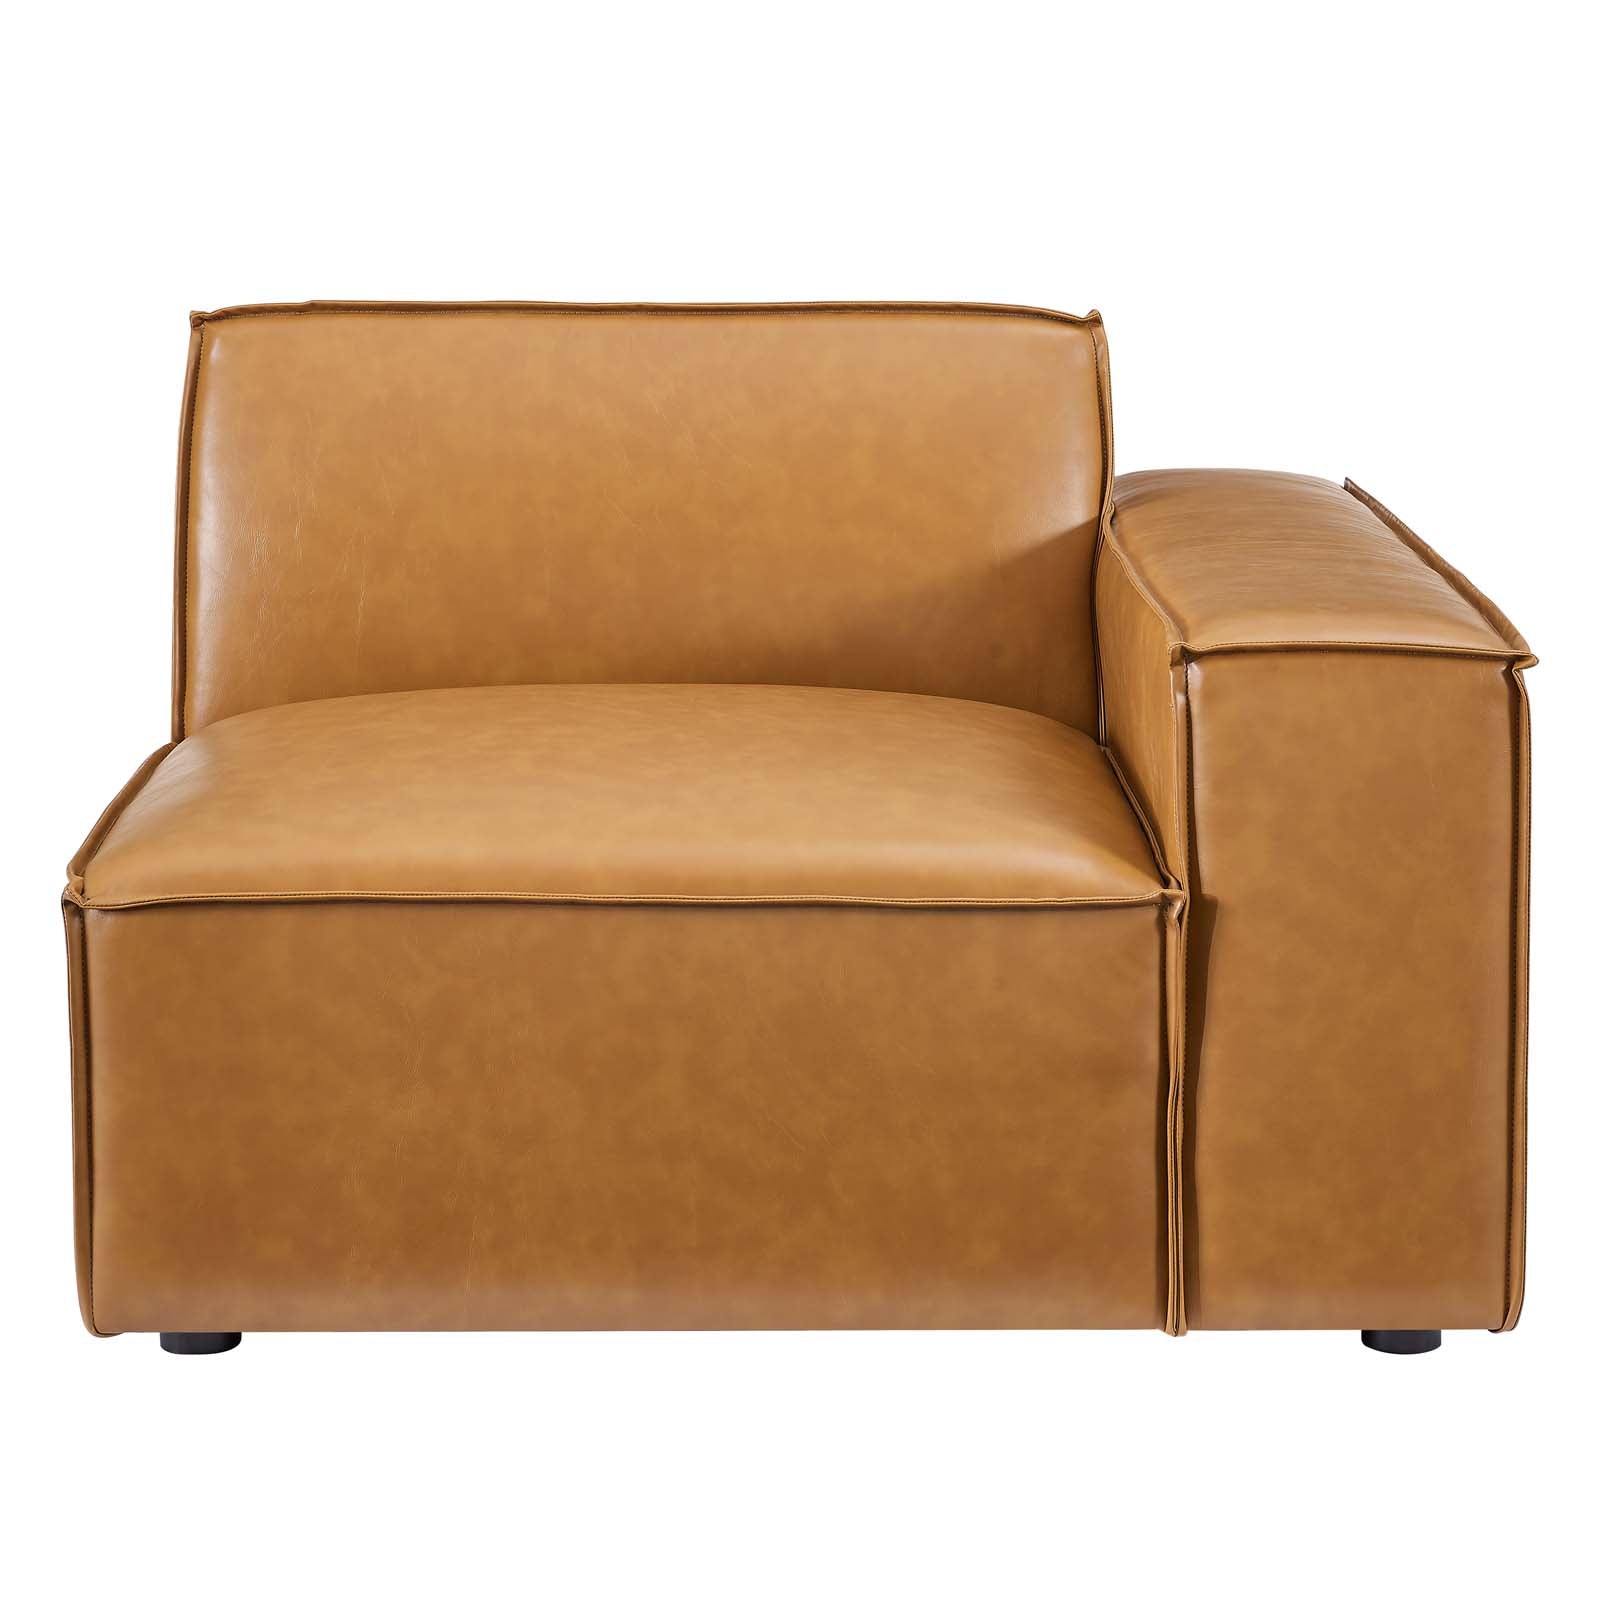 Modway Accent Chairs - Restore Right-Arm Vegan Leather Sectional Sofa Chair Tan